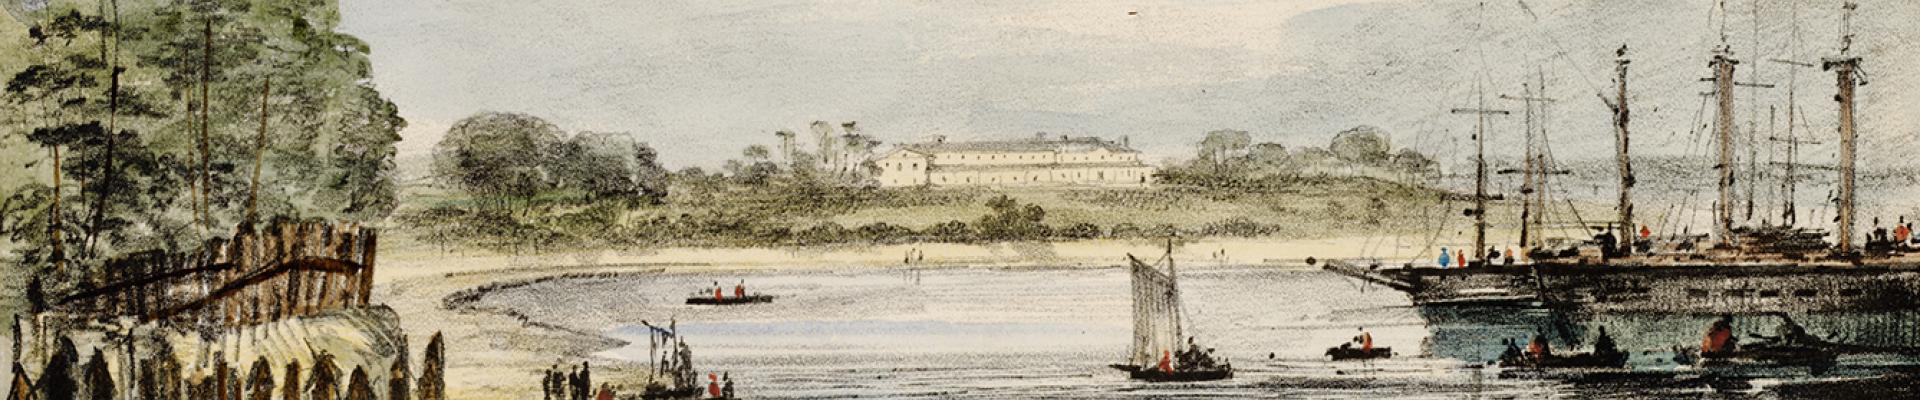 Old Government House, 1836, J.G. Austin, hand coloured lithograph,